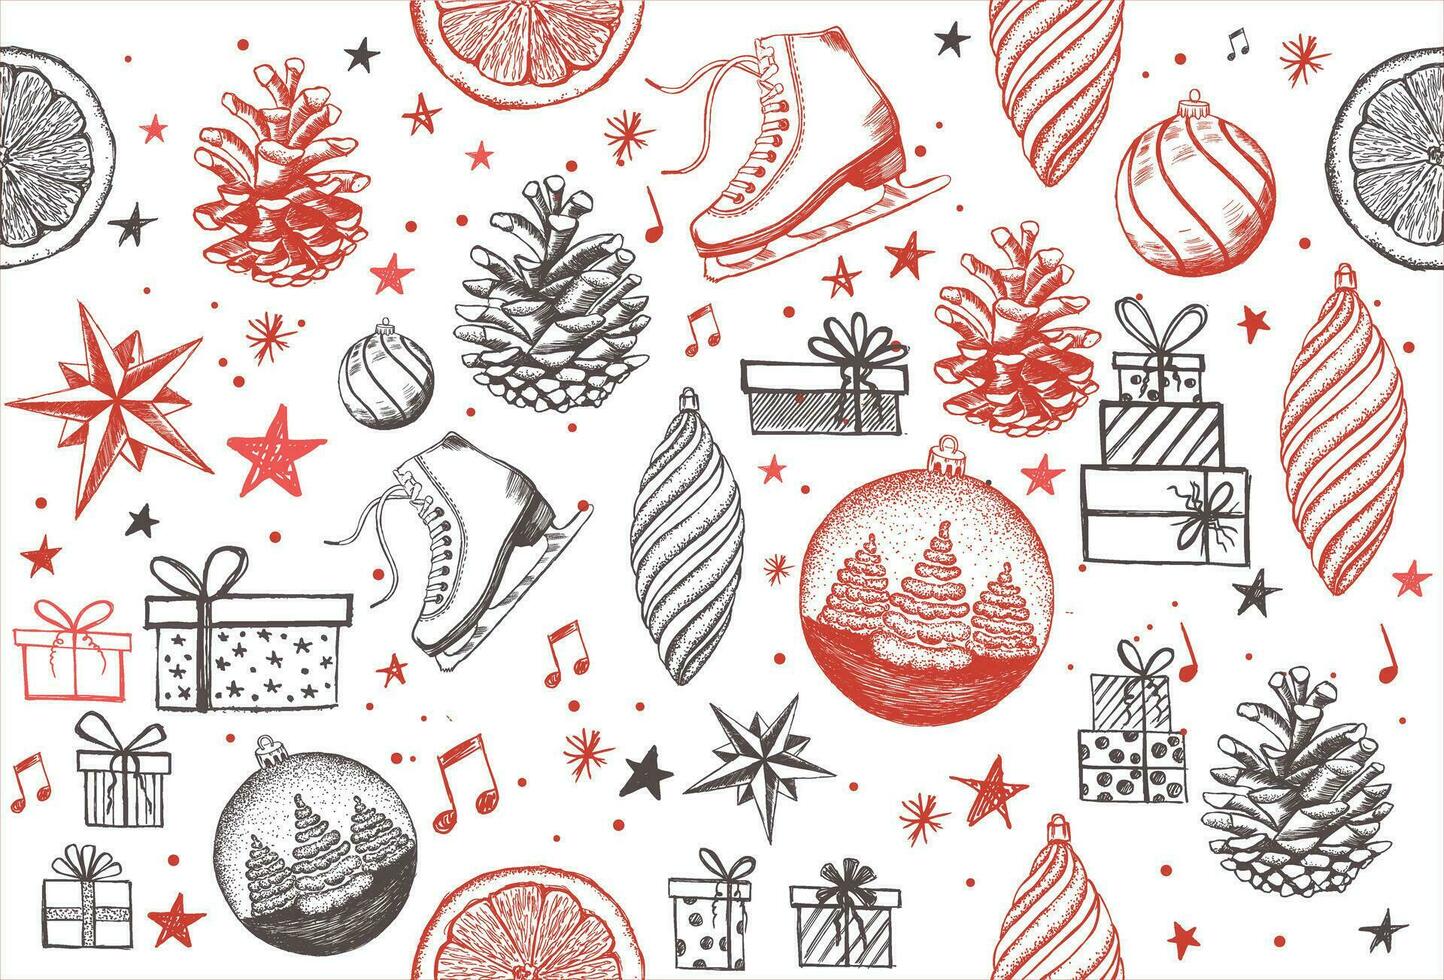 Christmas decorative elements like snow globe, gift box, decorative stars, tree wood, ski shoes, music note and many more for multiple use seamless pattern vector